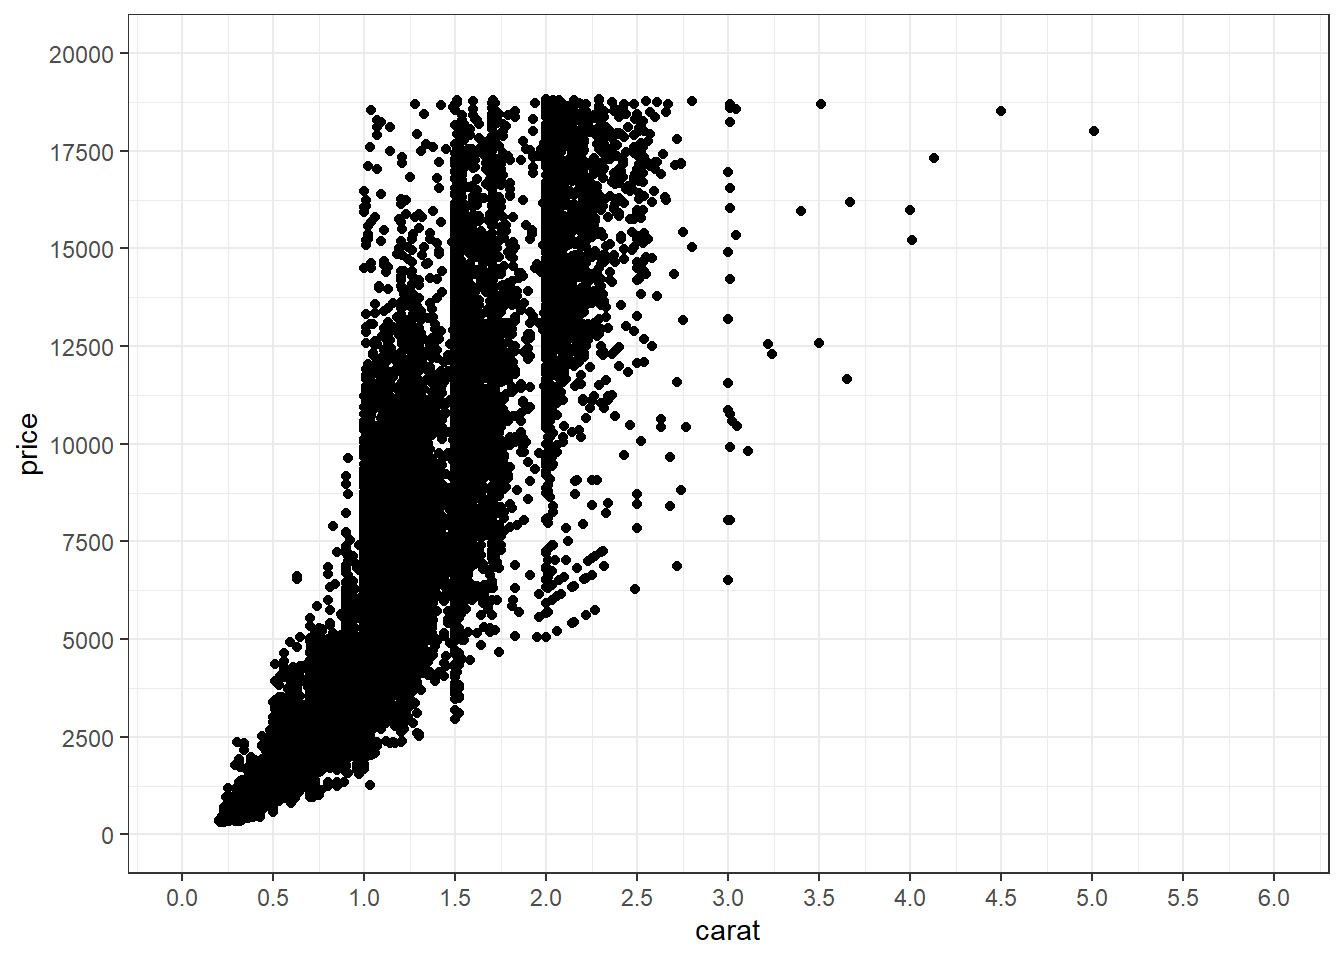 A ggplot object with a geom_point layer, the price of diamonds by their carat, black & white theme